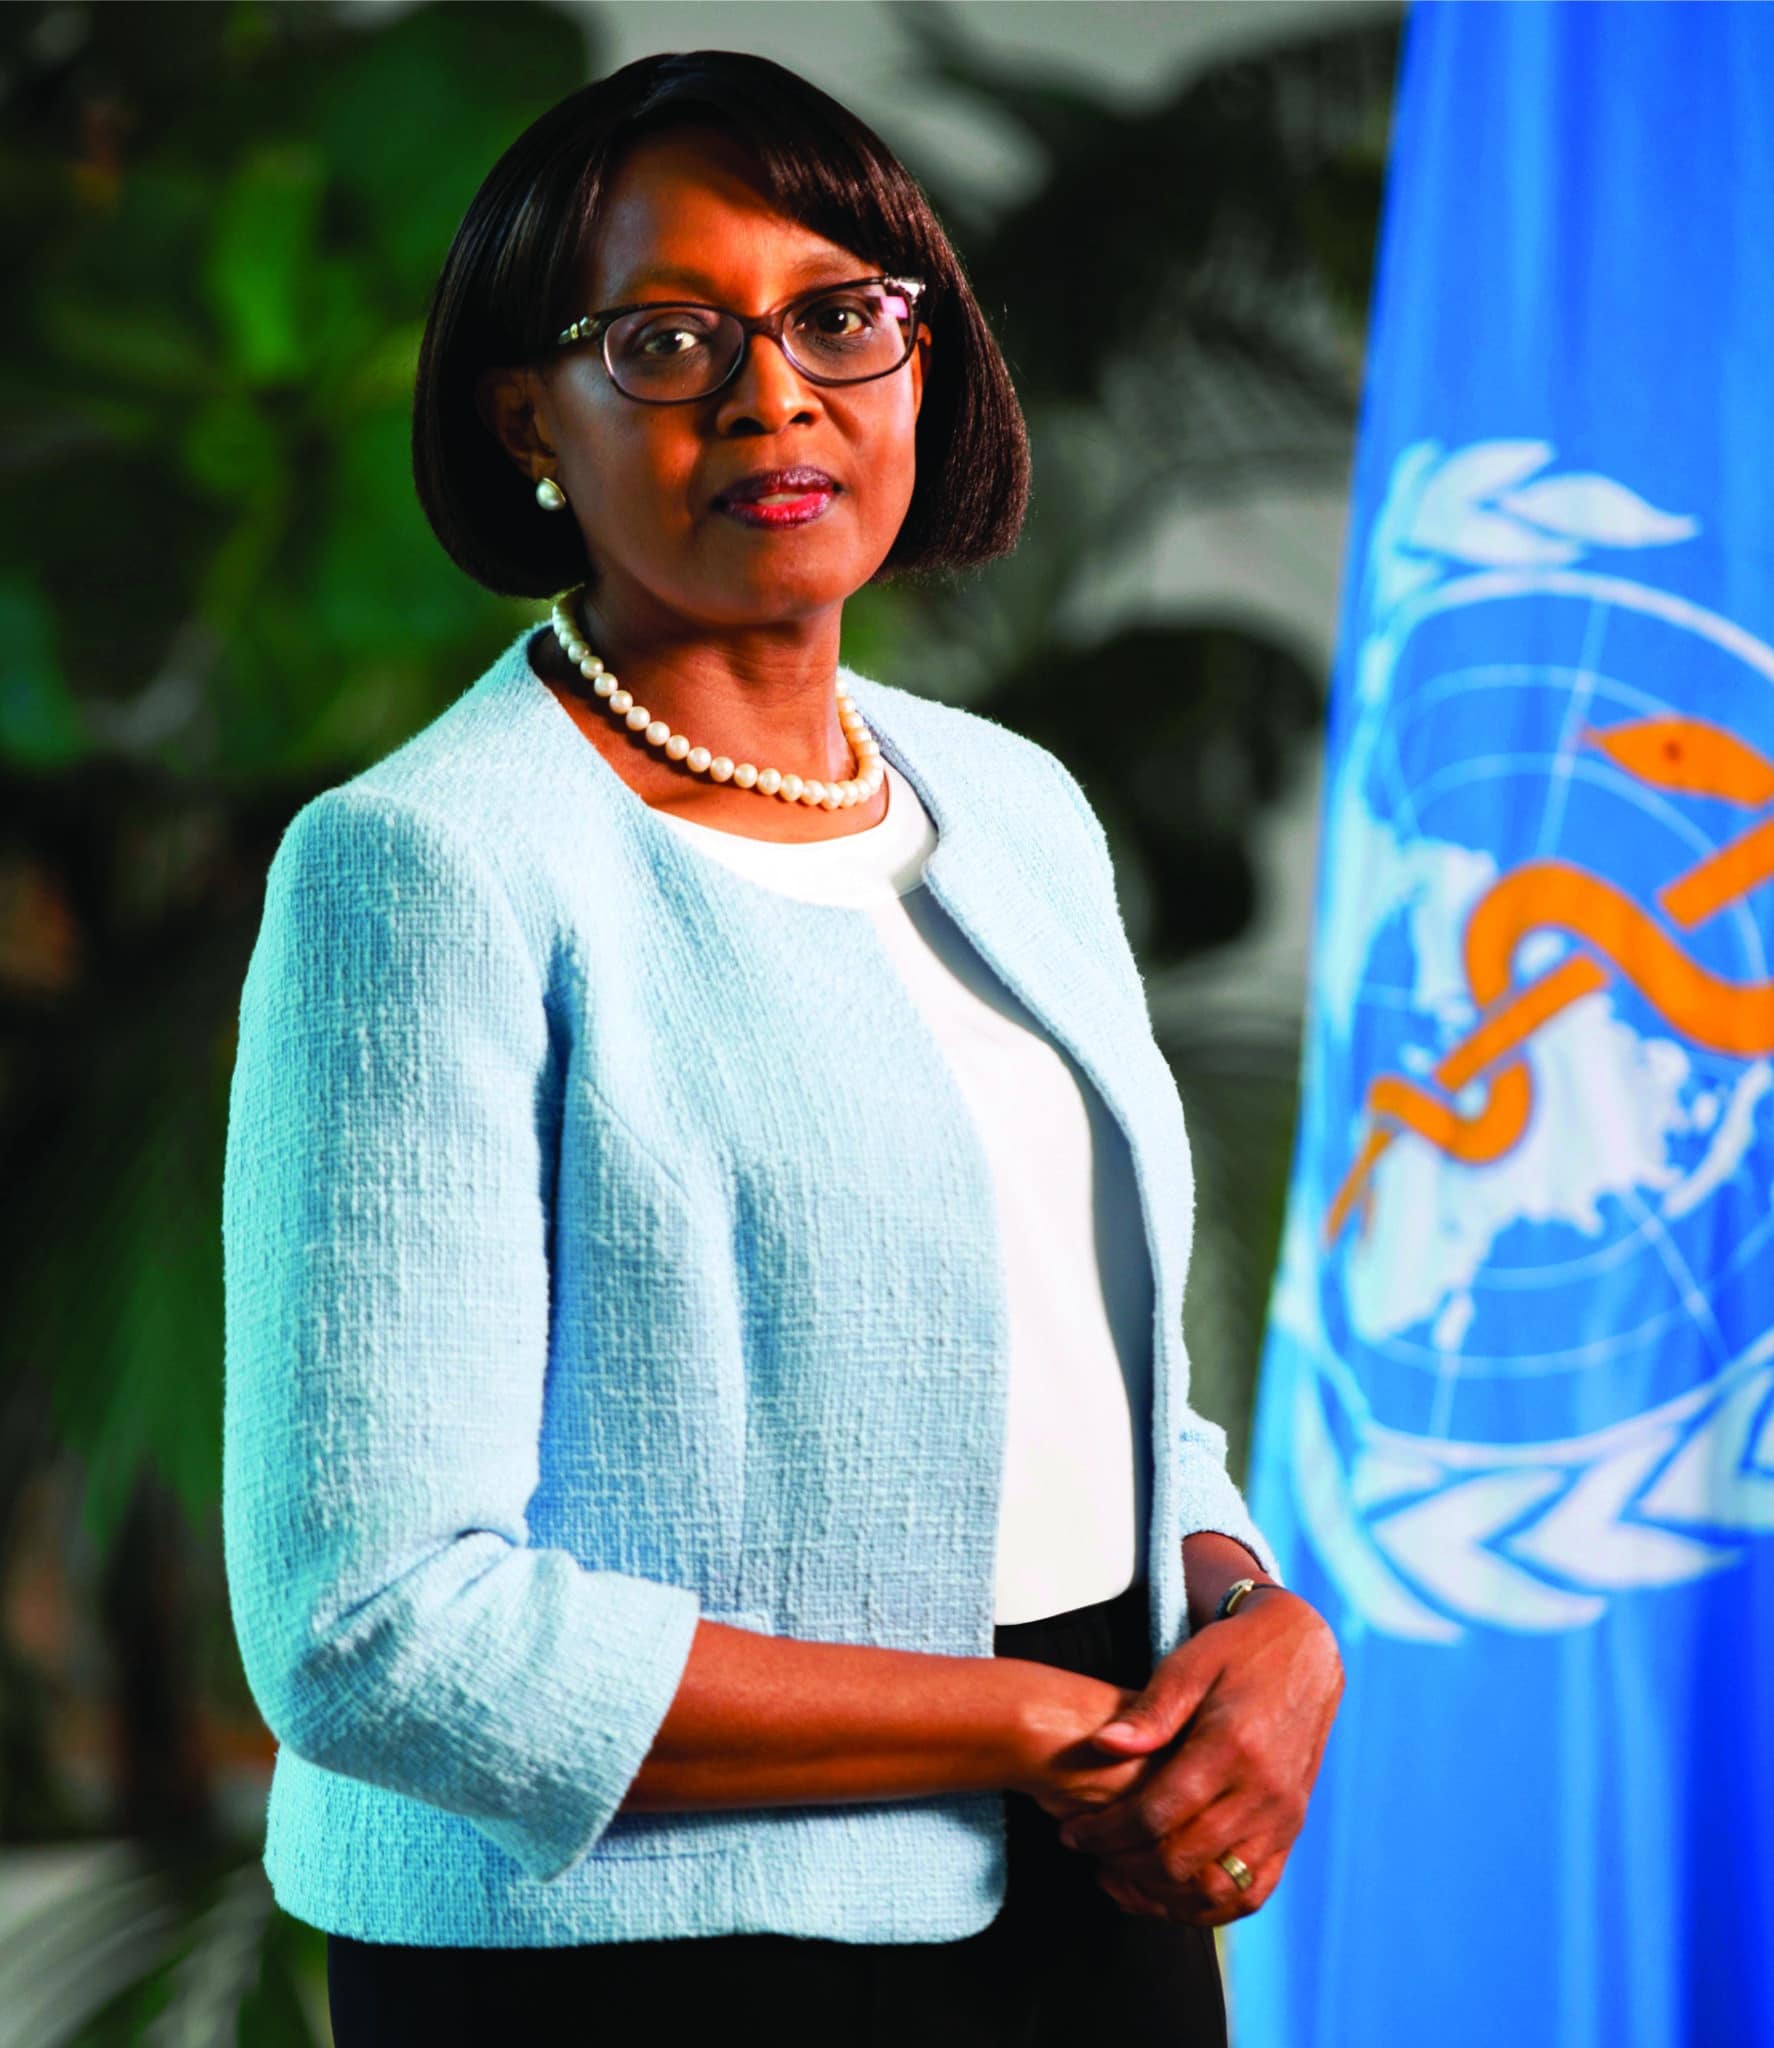 COVID-19: WHO Africa head Moeti stands firm over Madagascar medicine.